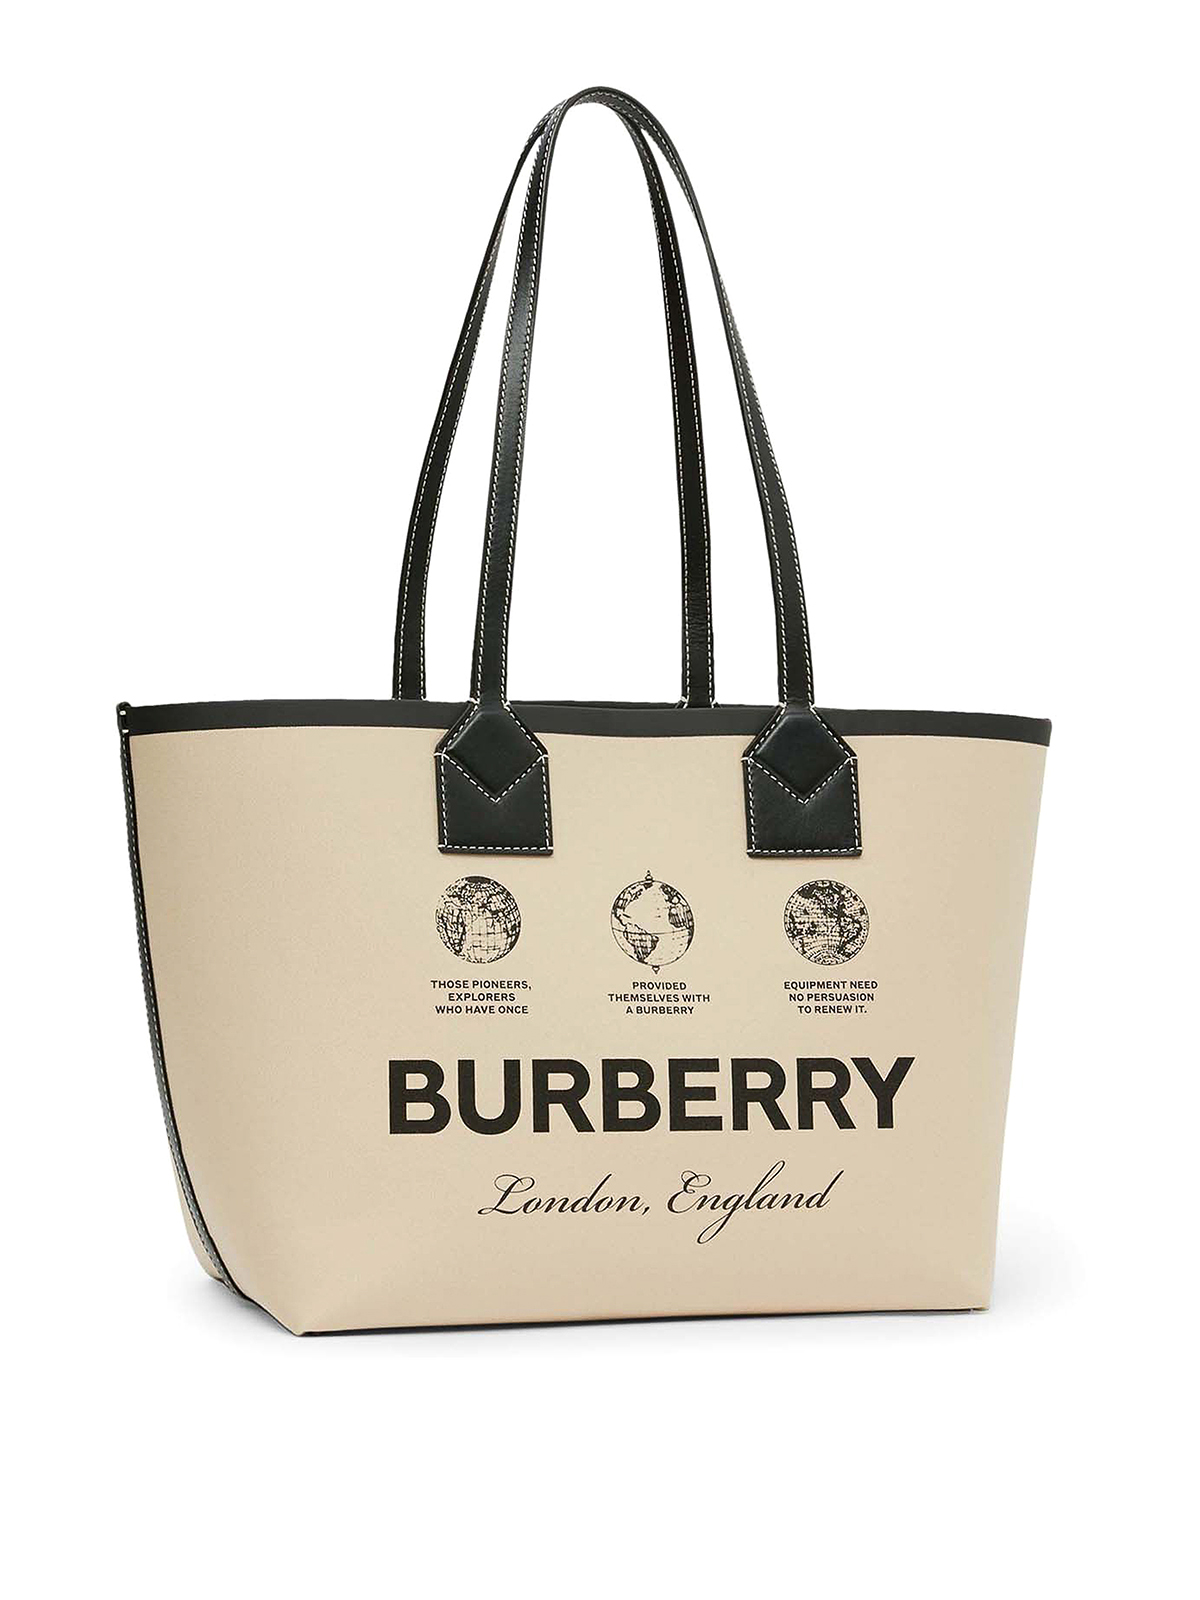 Totes bags Burberry - Leather bag with logo and tartan interior - 8063120